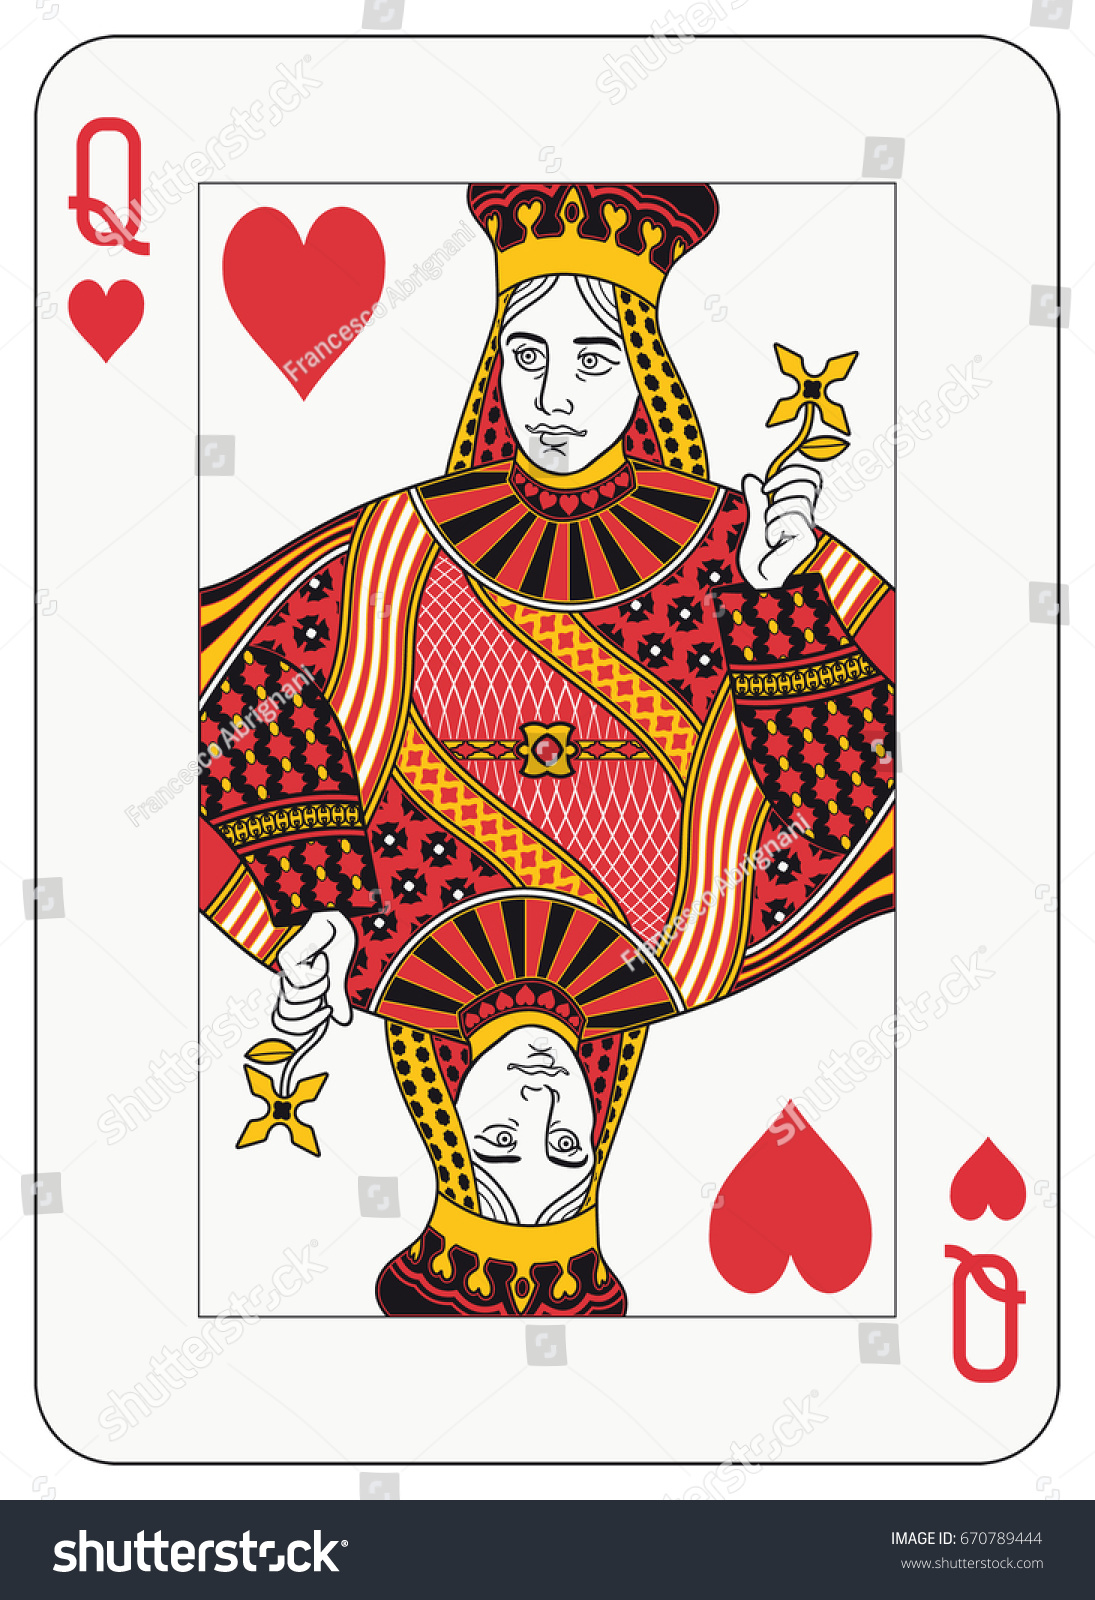 Queen Hearts Playing Card Original Figure Stock Vector (Royalty Free ...